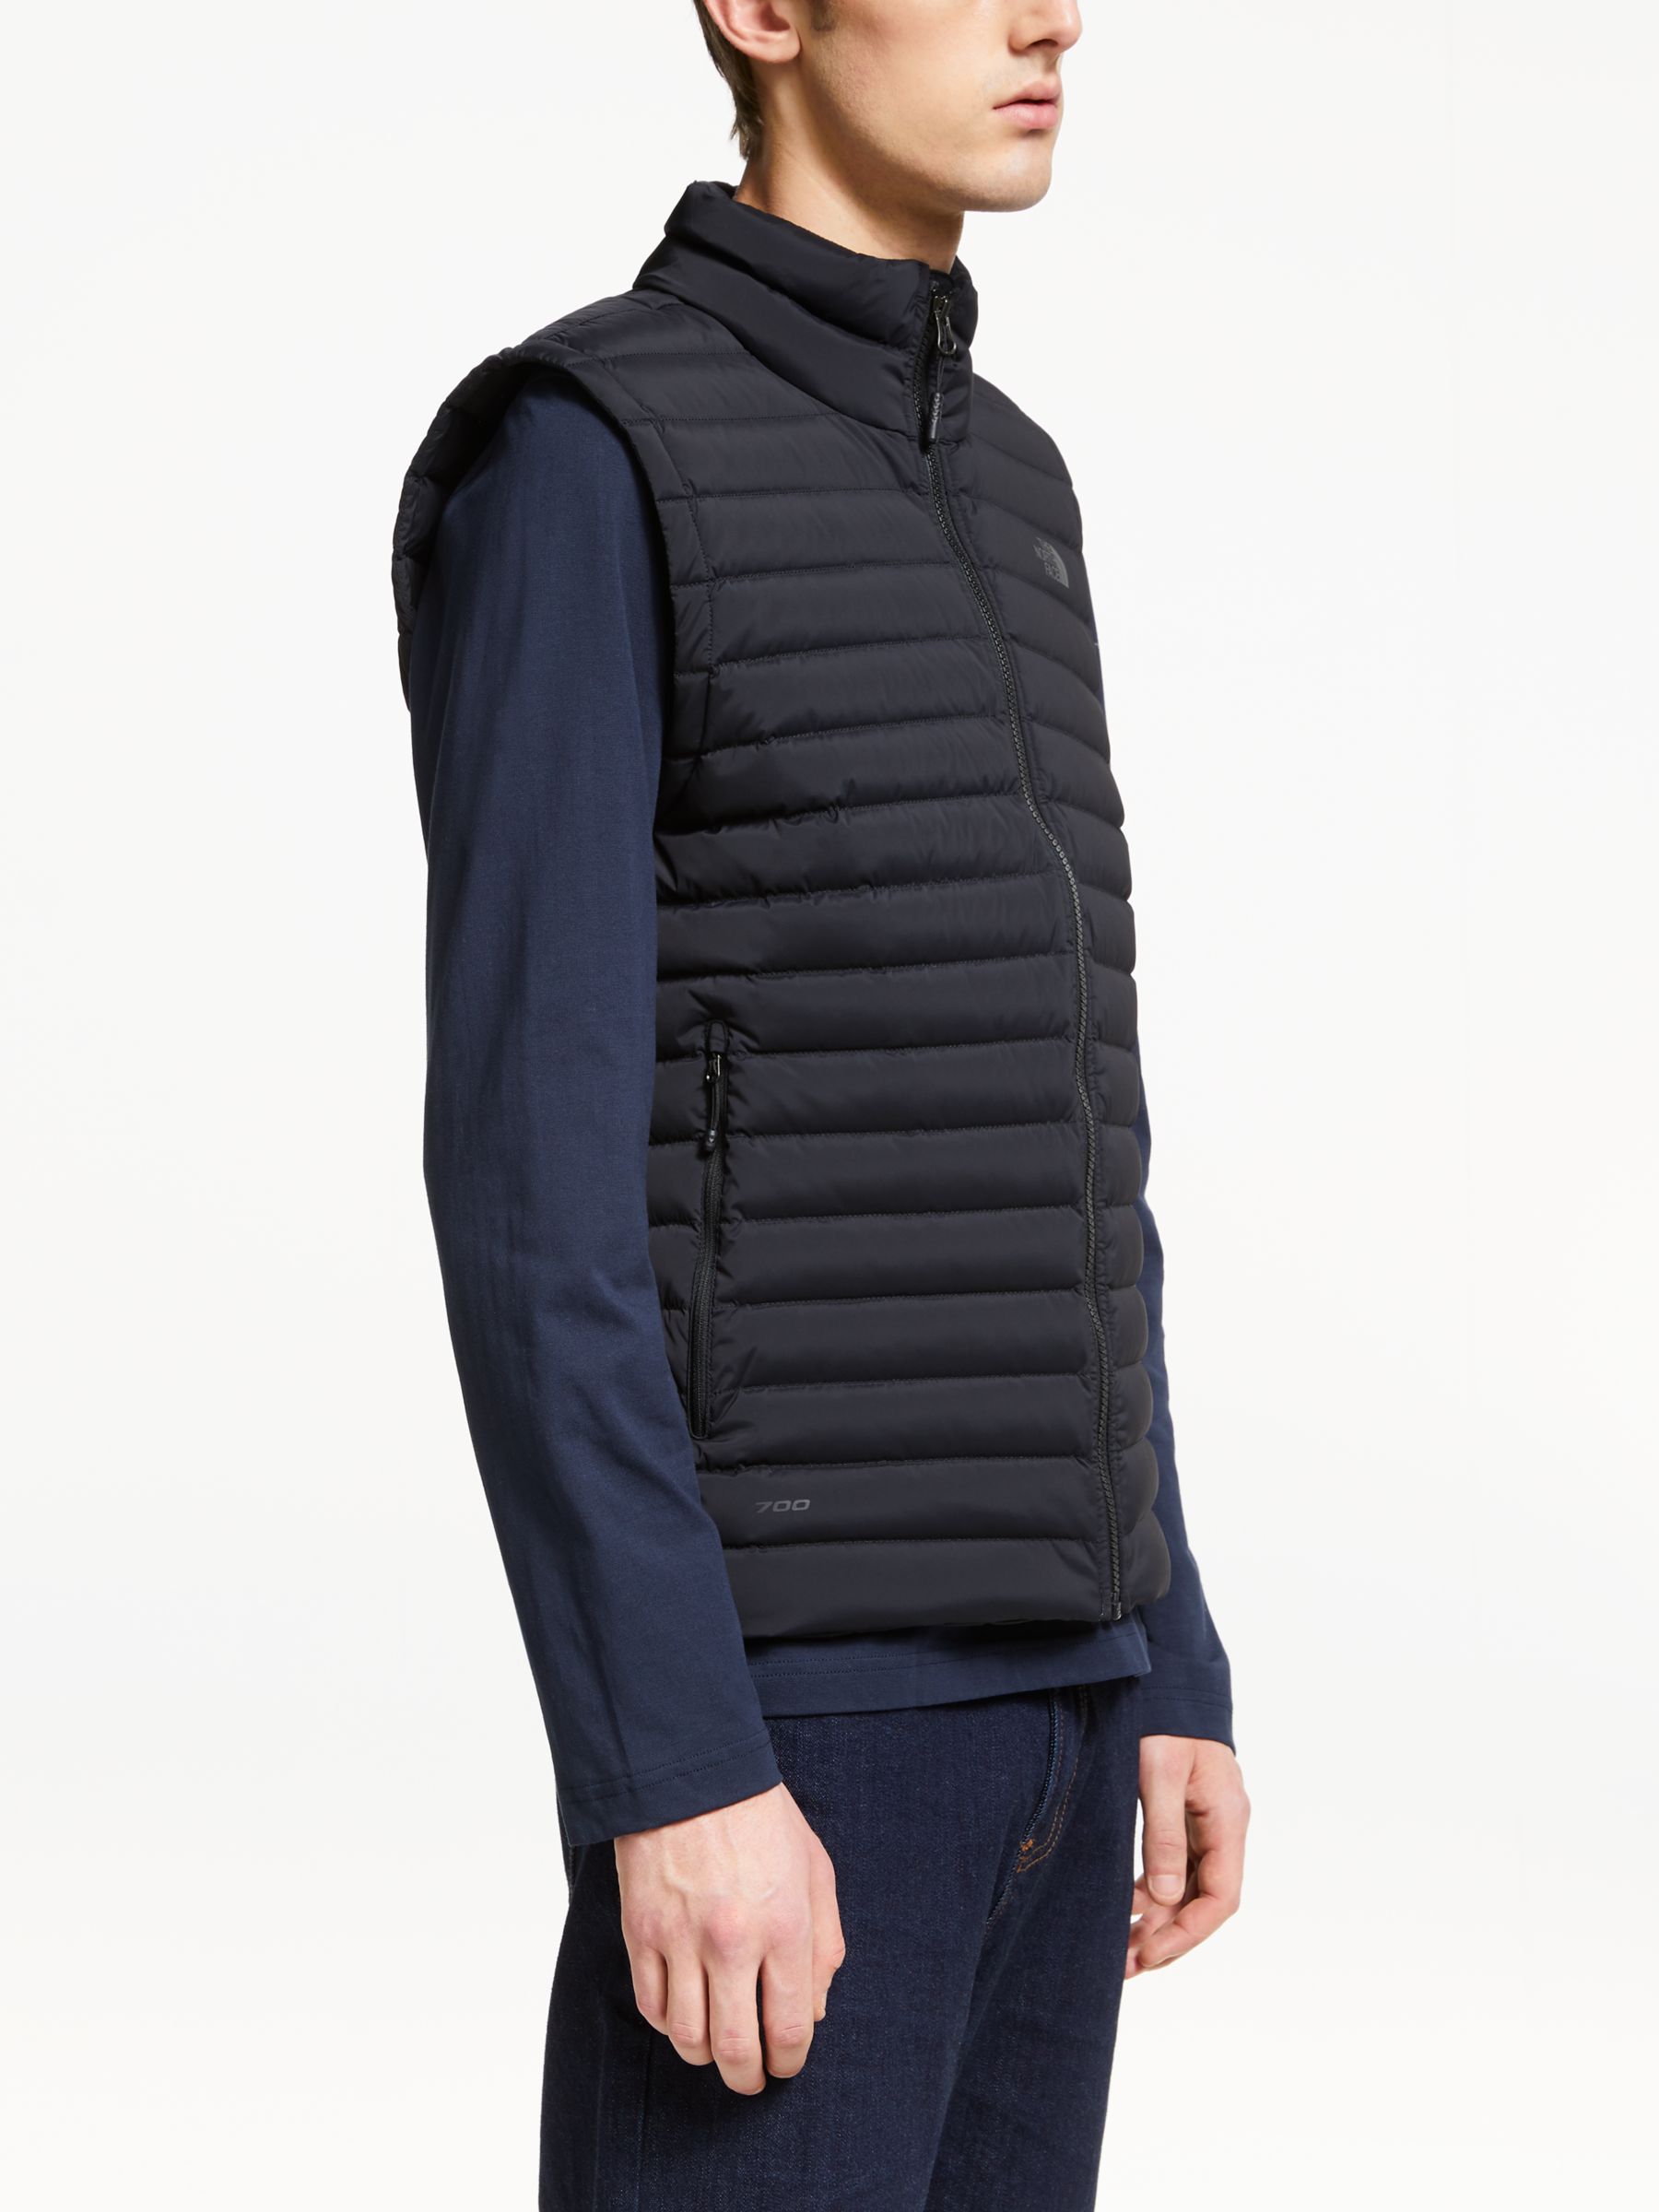 north face stretch down vest